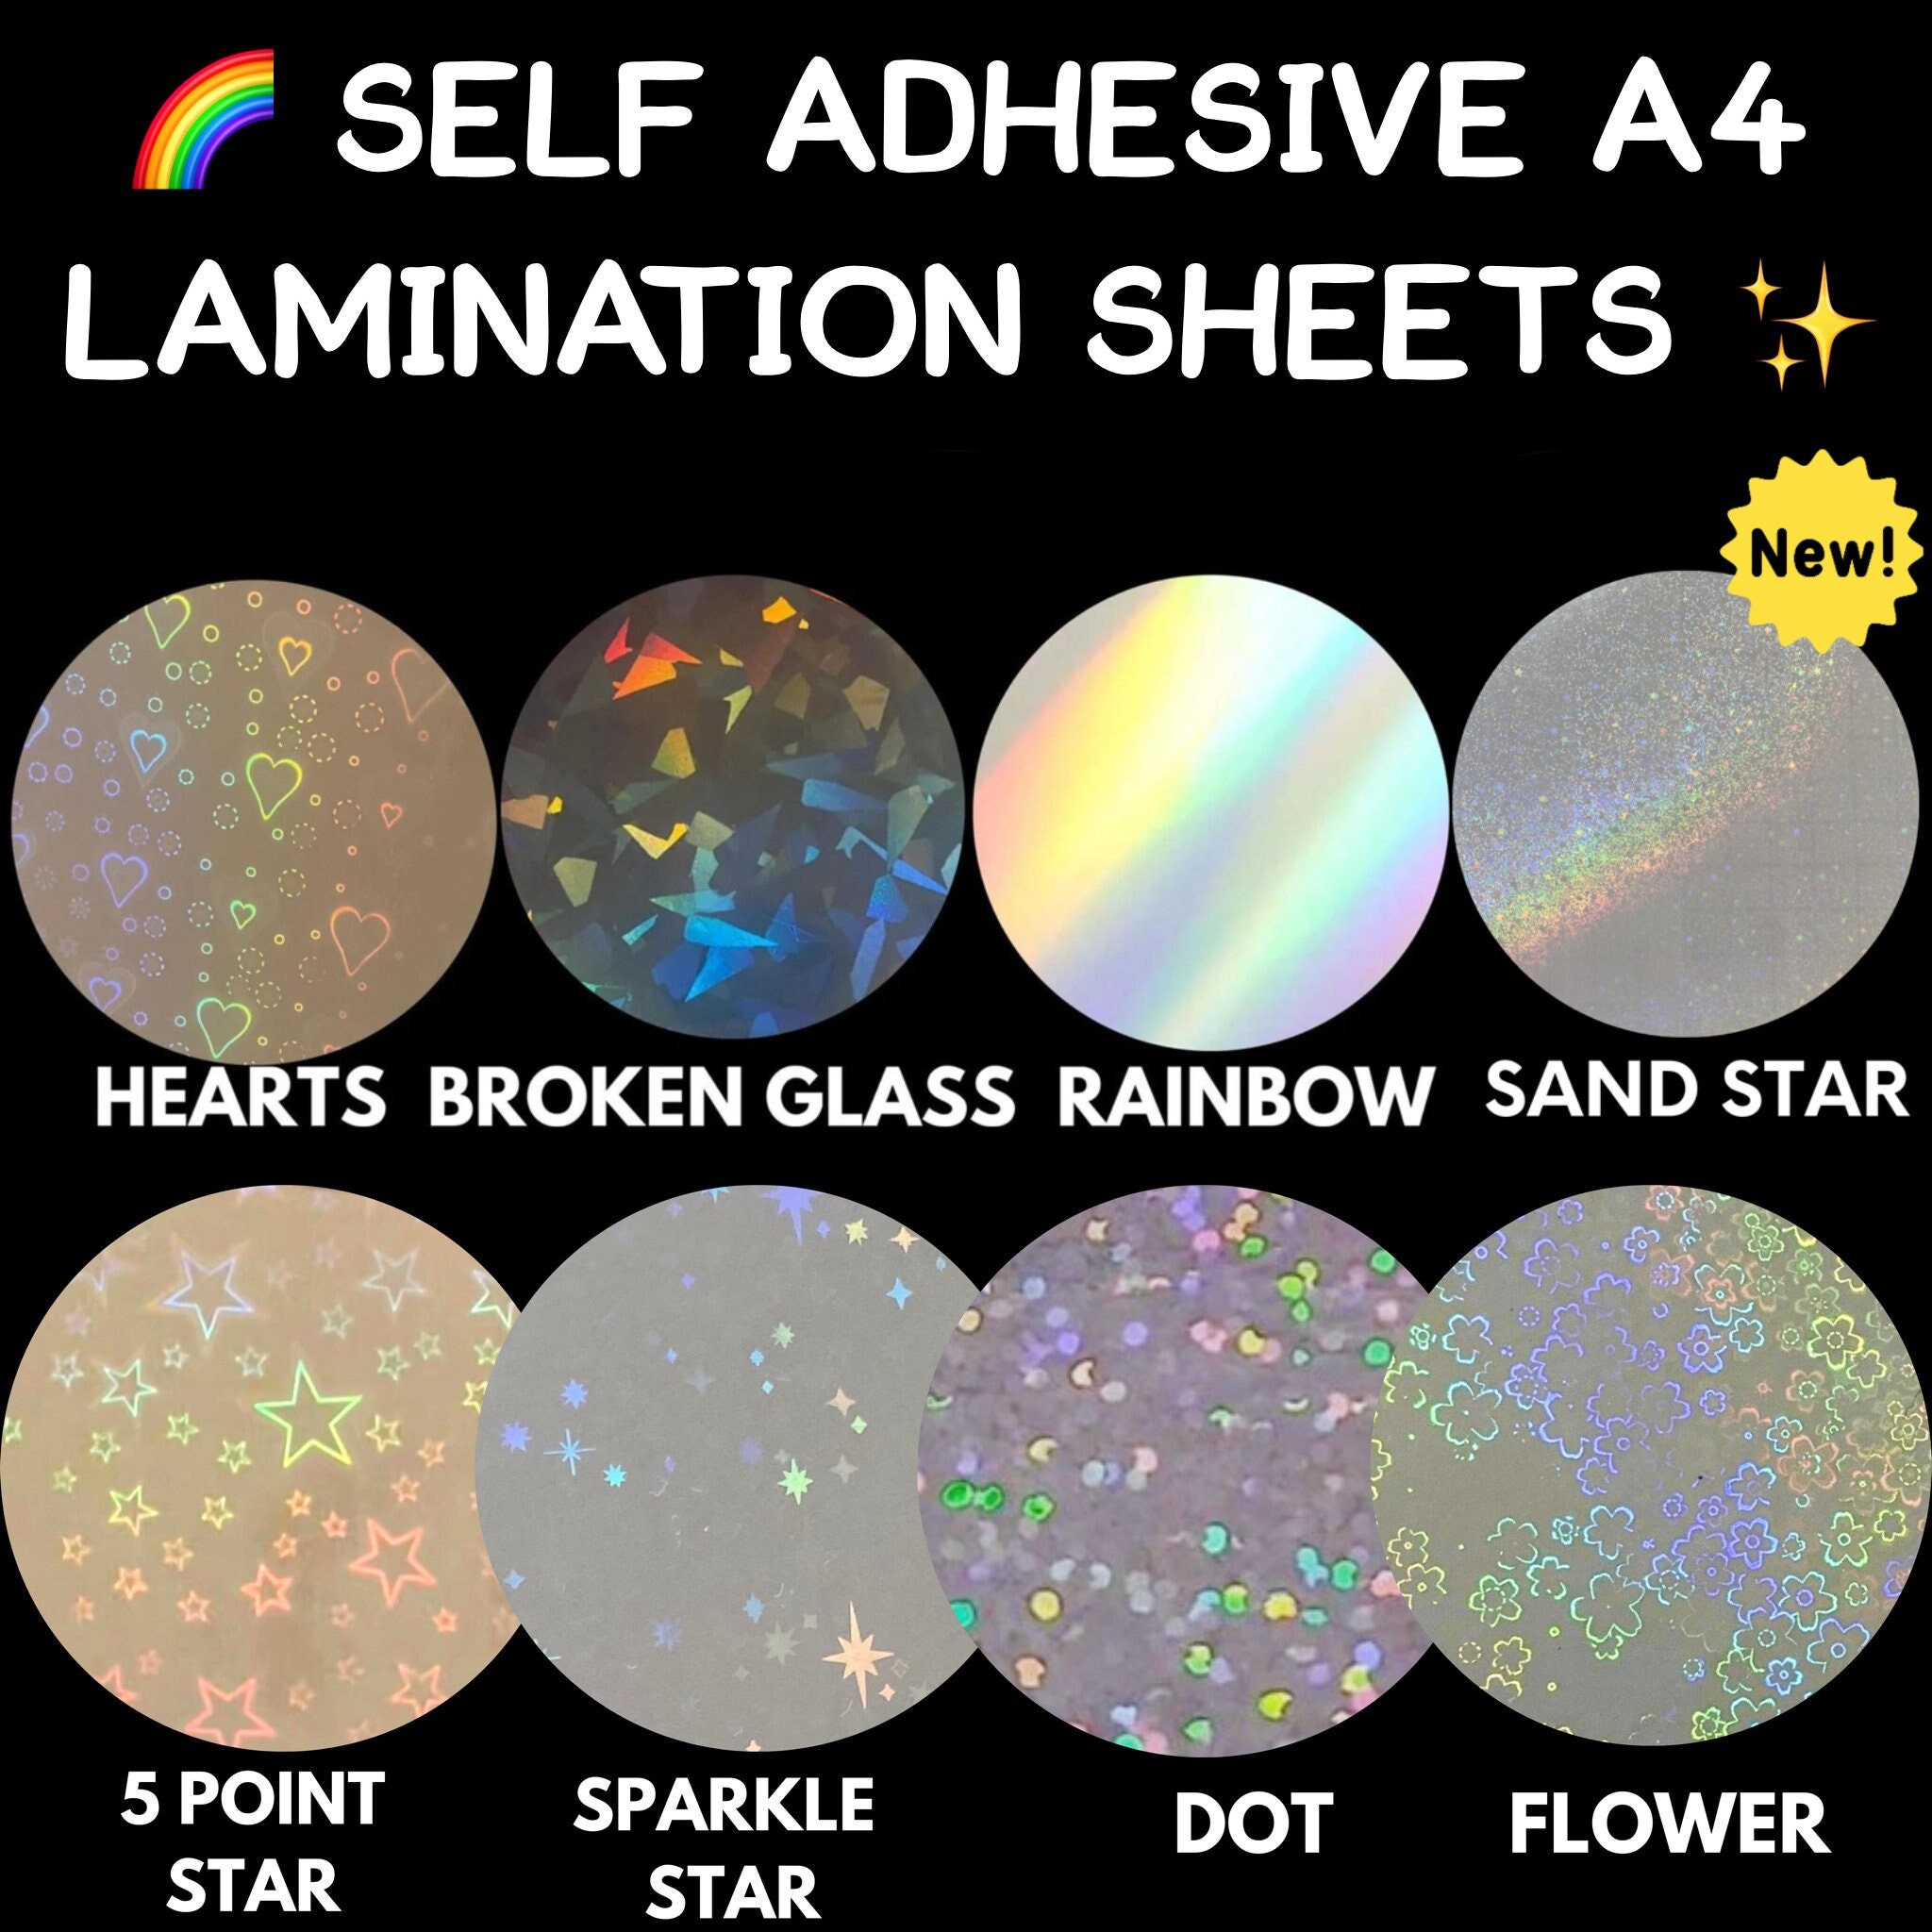  30 Sheets 6 Styles Transparent Holographic Overlay Holographic  Vinyl Overlay Clear Holographic Laminate Sheets Adhesive Laminated Film  Glossy Craft Sheet for Stickers, A4 Size, 8.3 x 11.7 Inches : Arts, Crafts  & Sewing